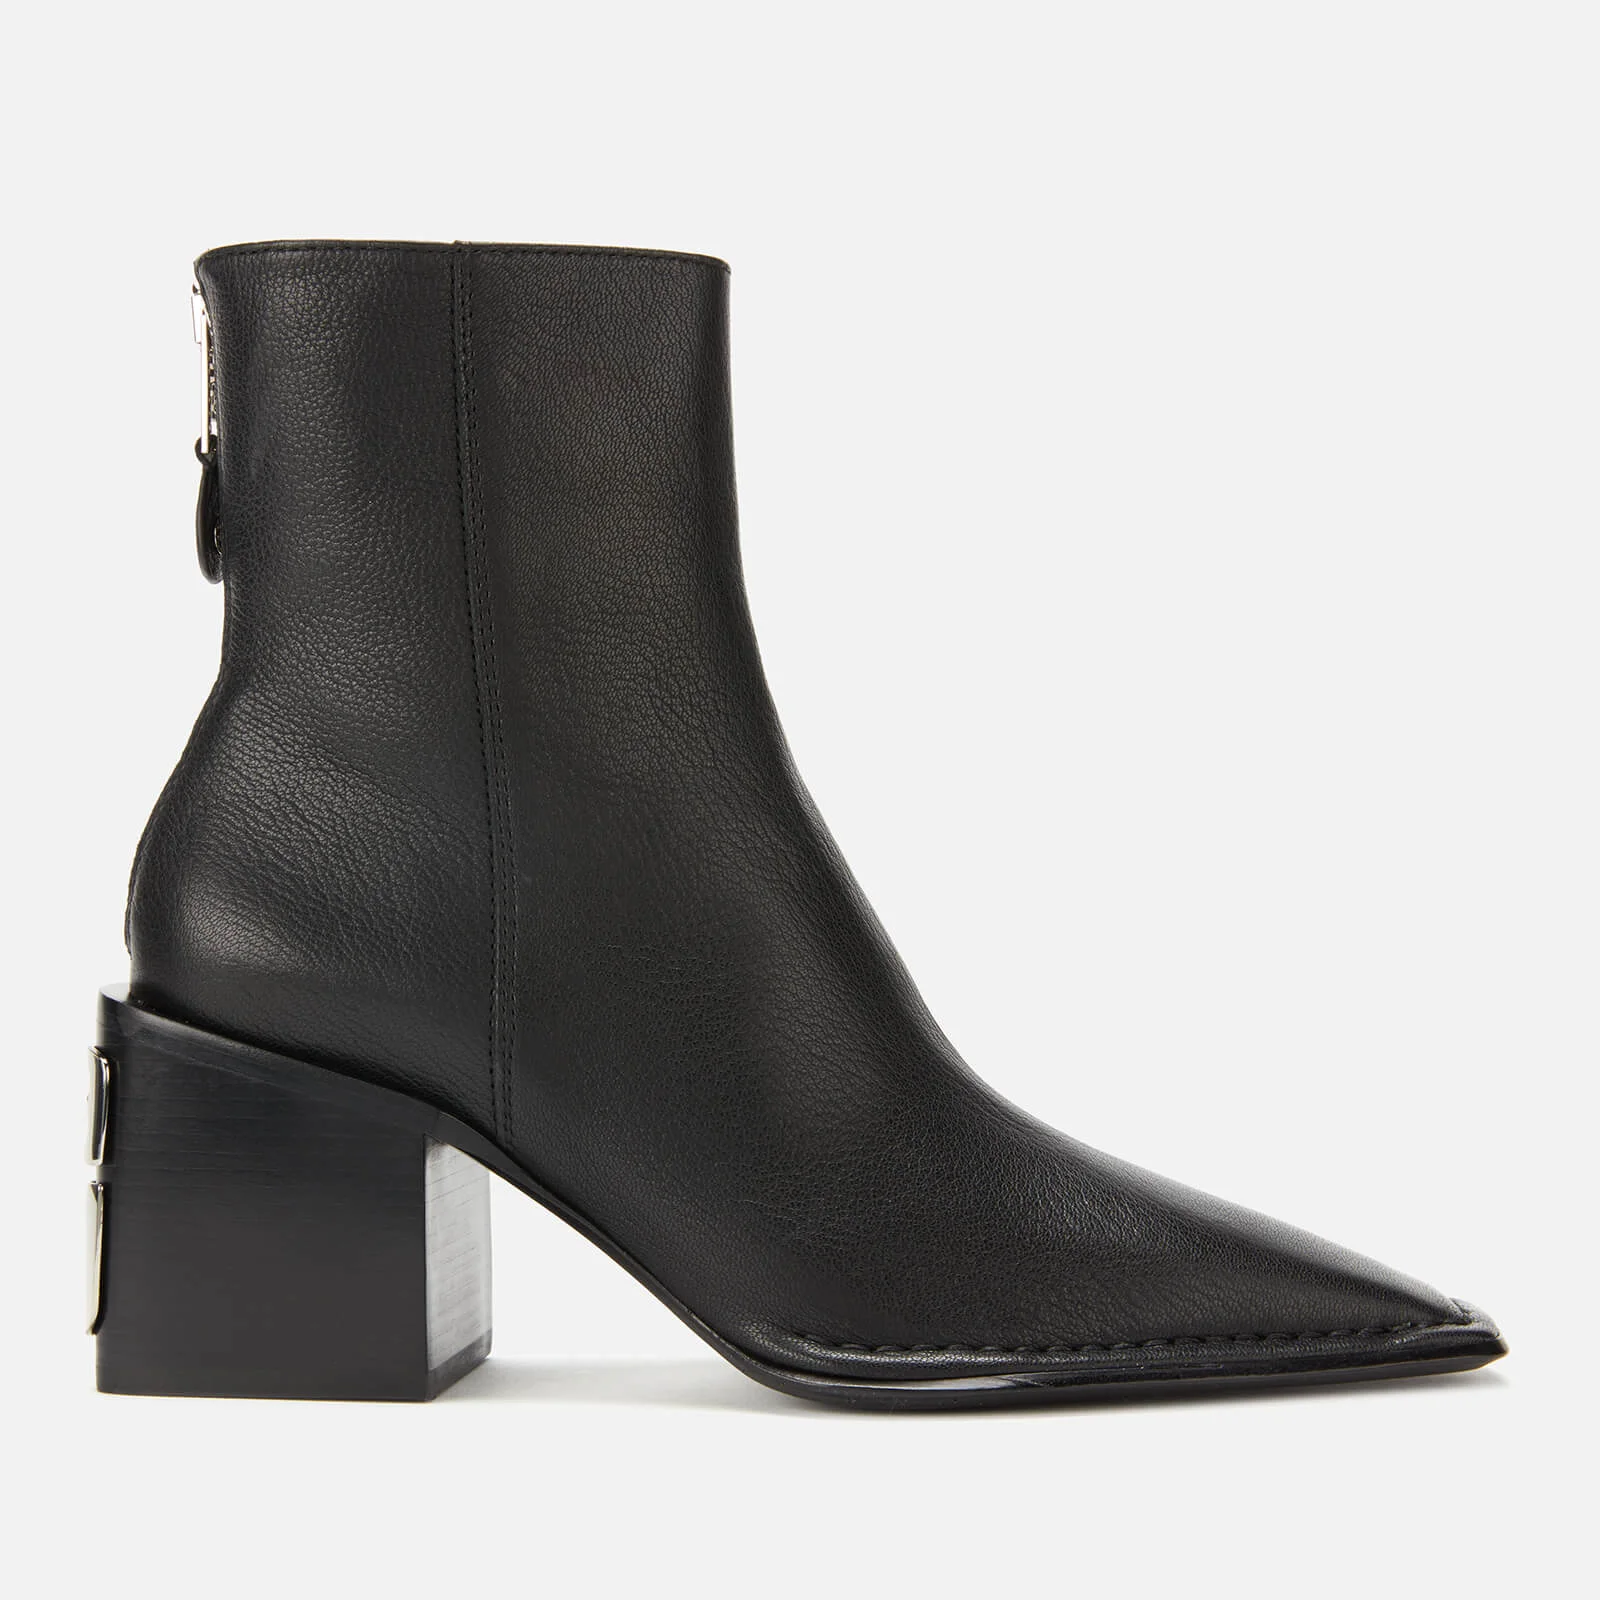 Alexander Wang Women's Parker Grained Leather Heeled Ankle Boots - Black Image 1